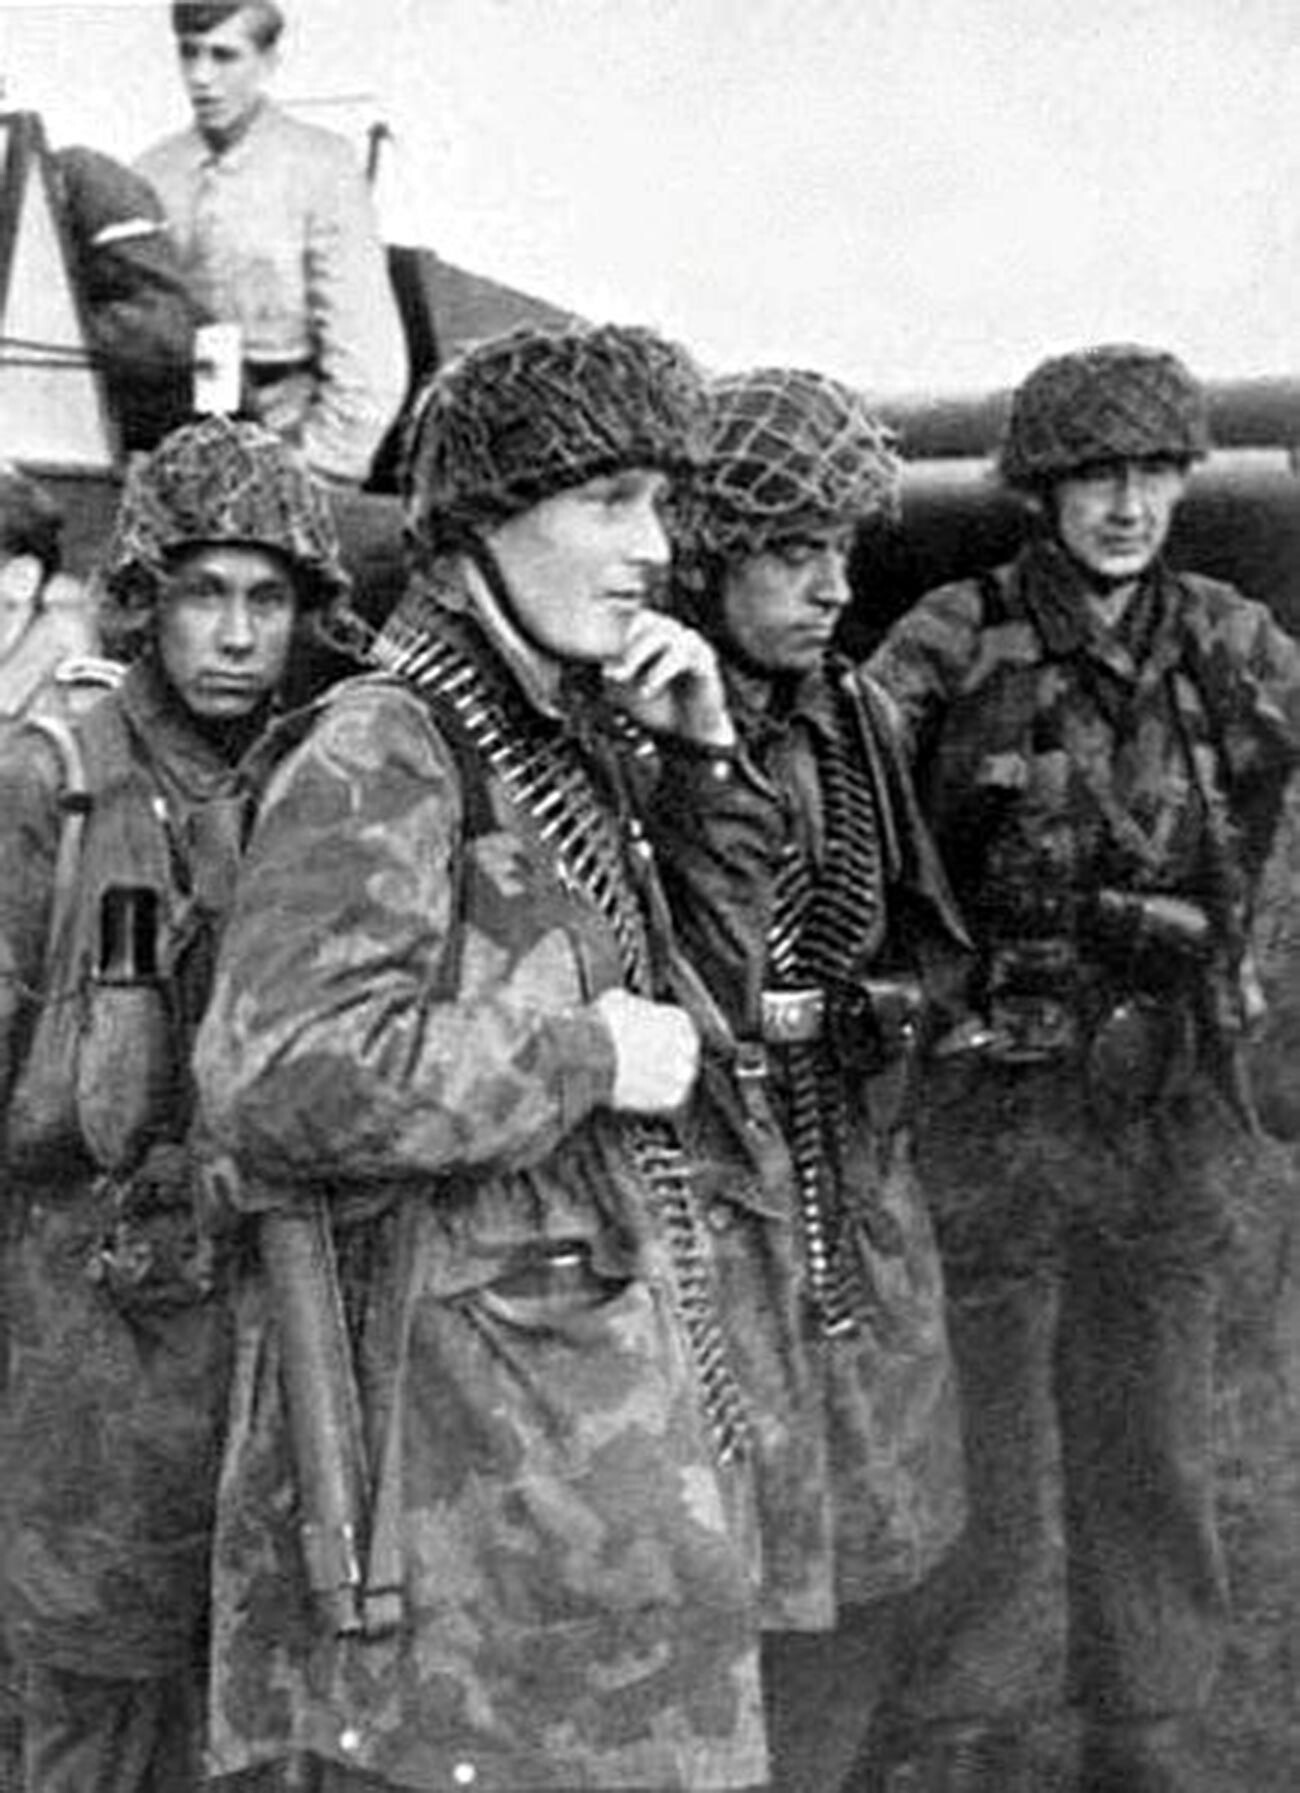 Soldiers of the 500th SS Parachute Battalion.